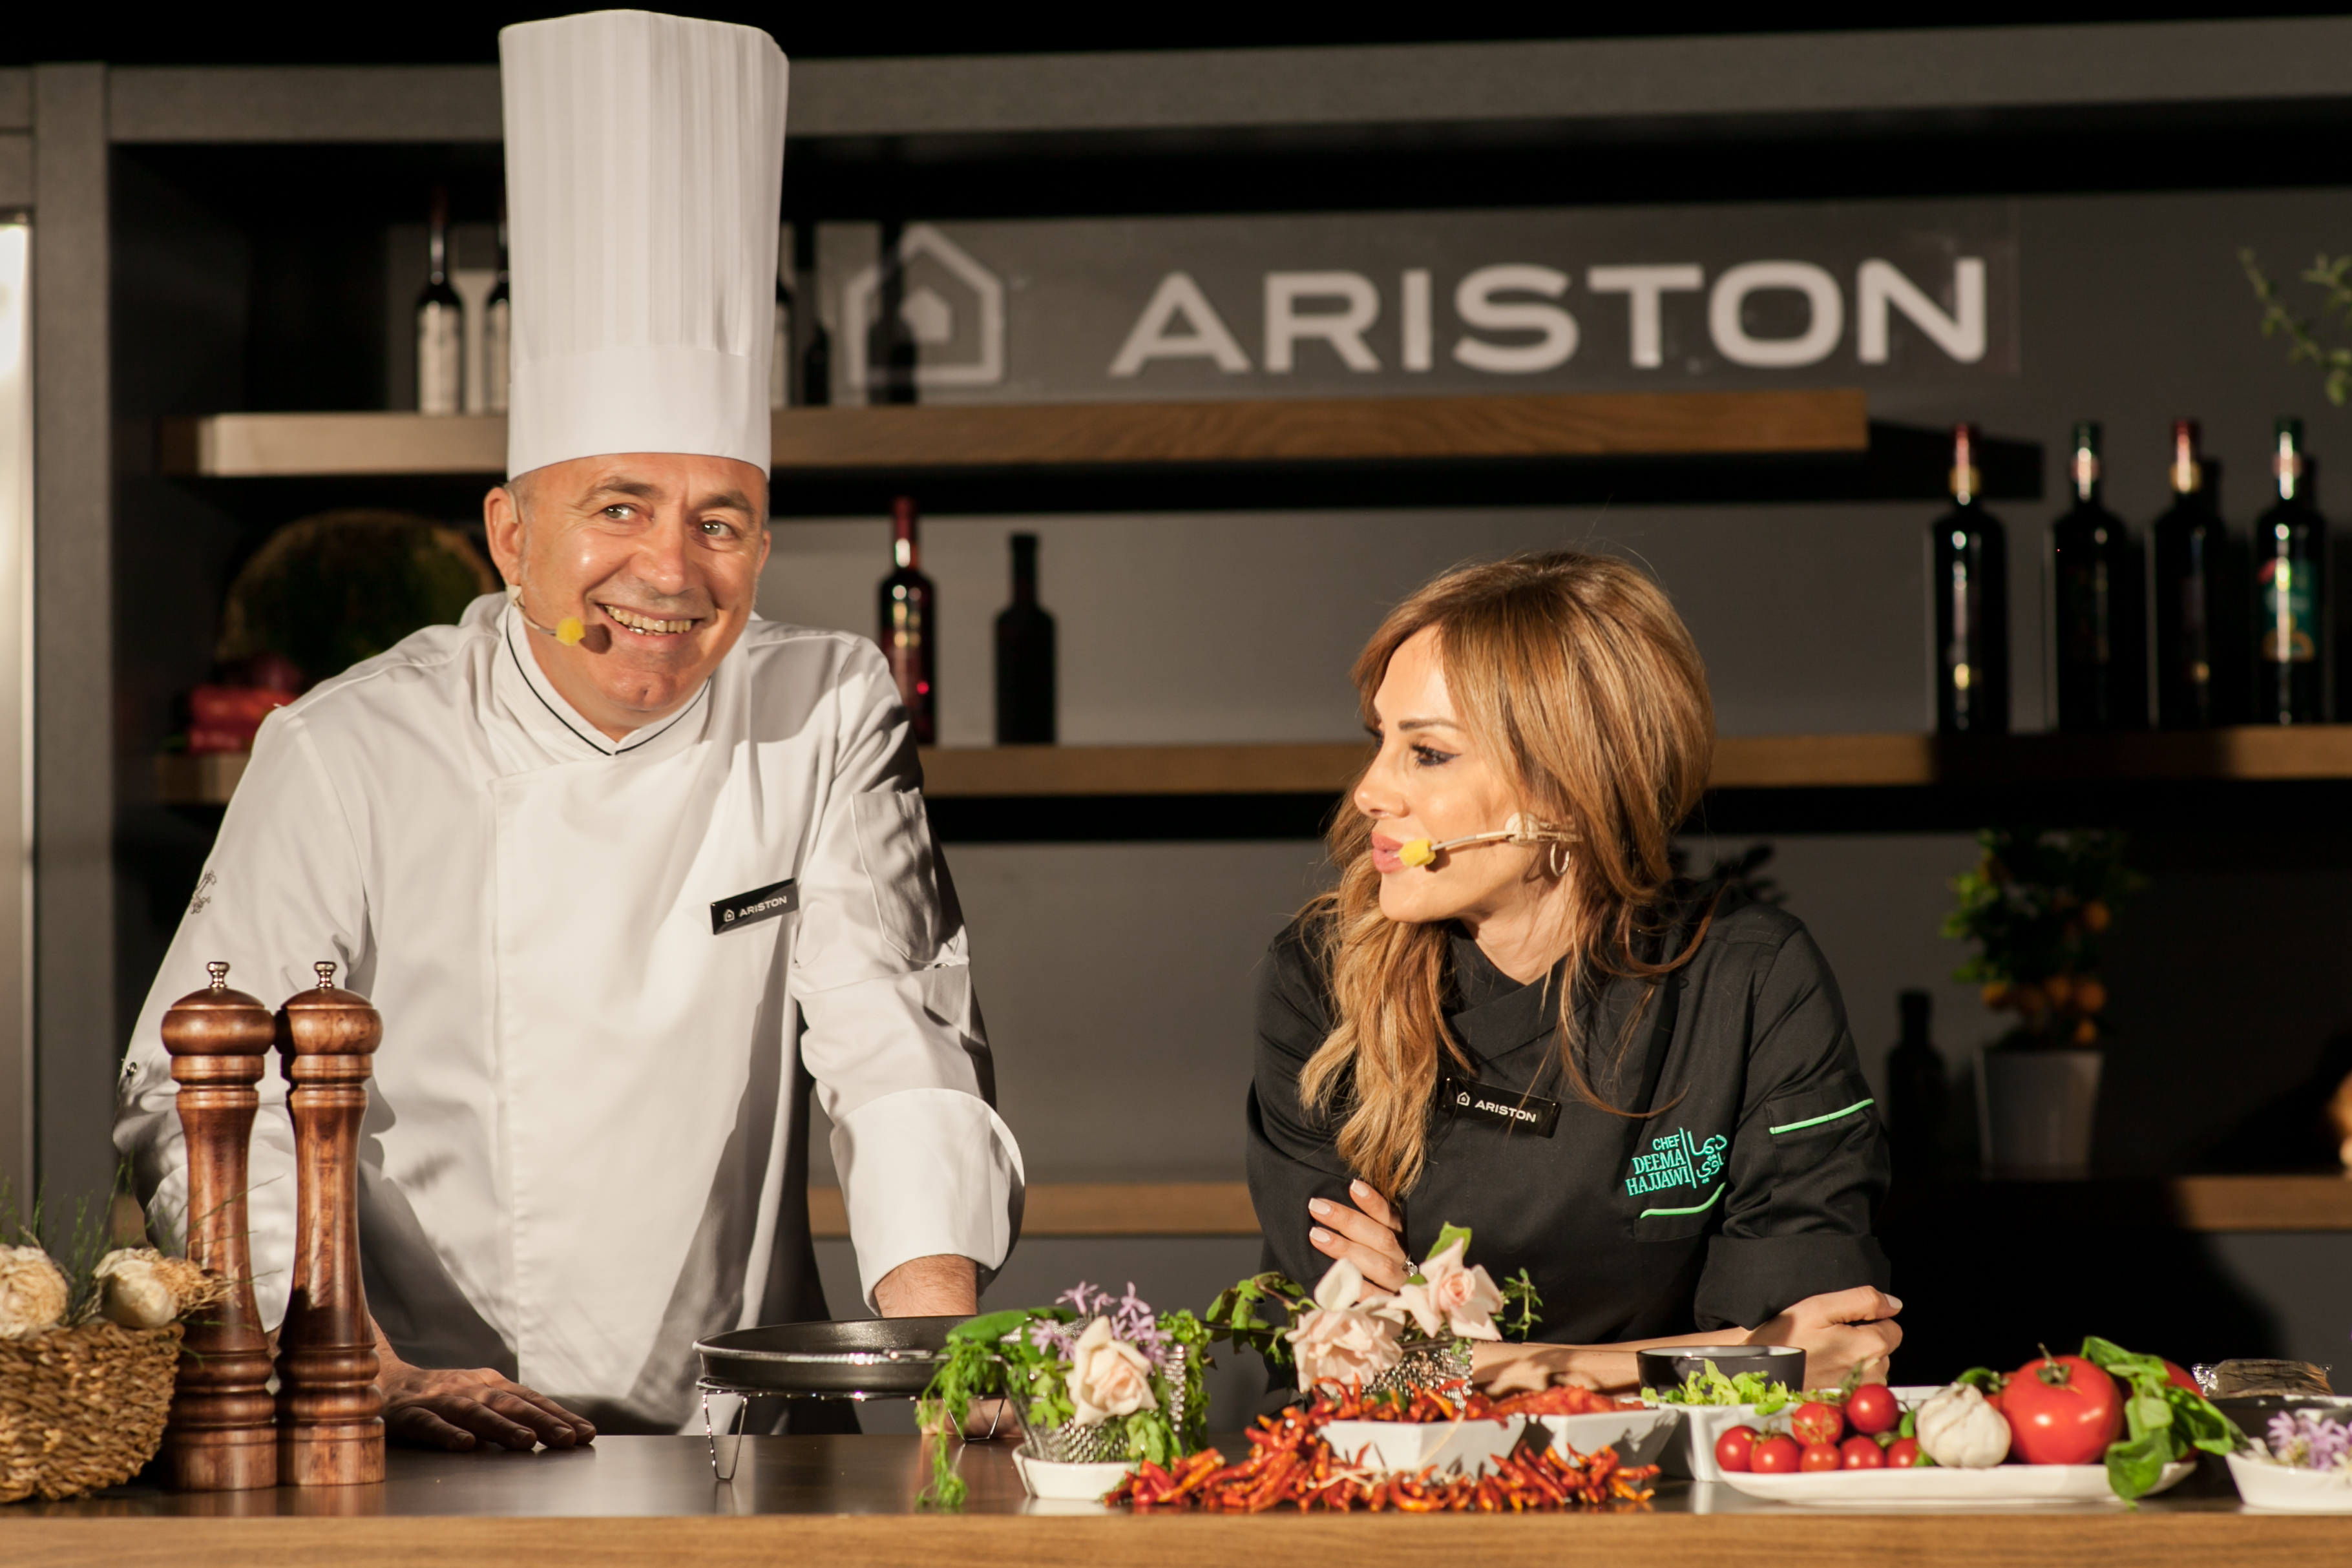 Whirlpool Corporation unveils new kitchen concept for its Ariston brand